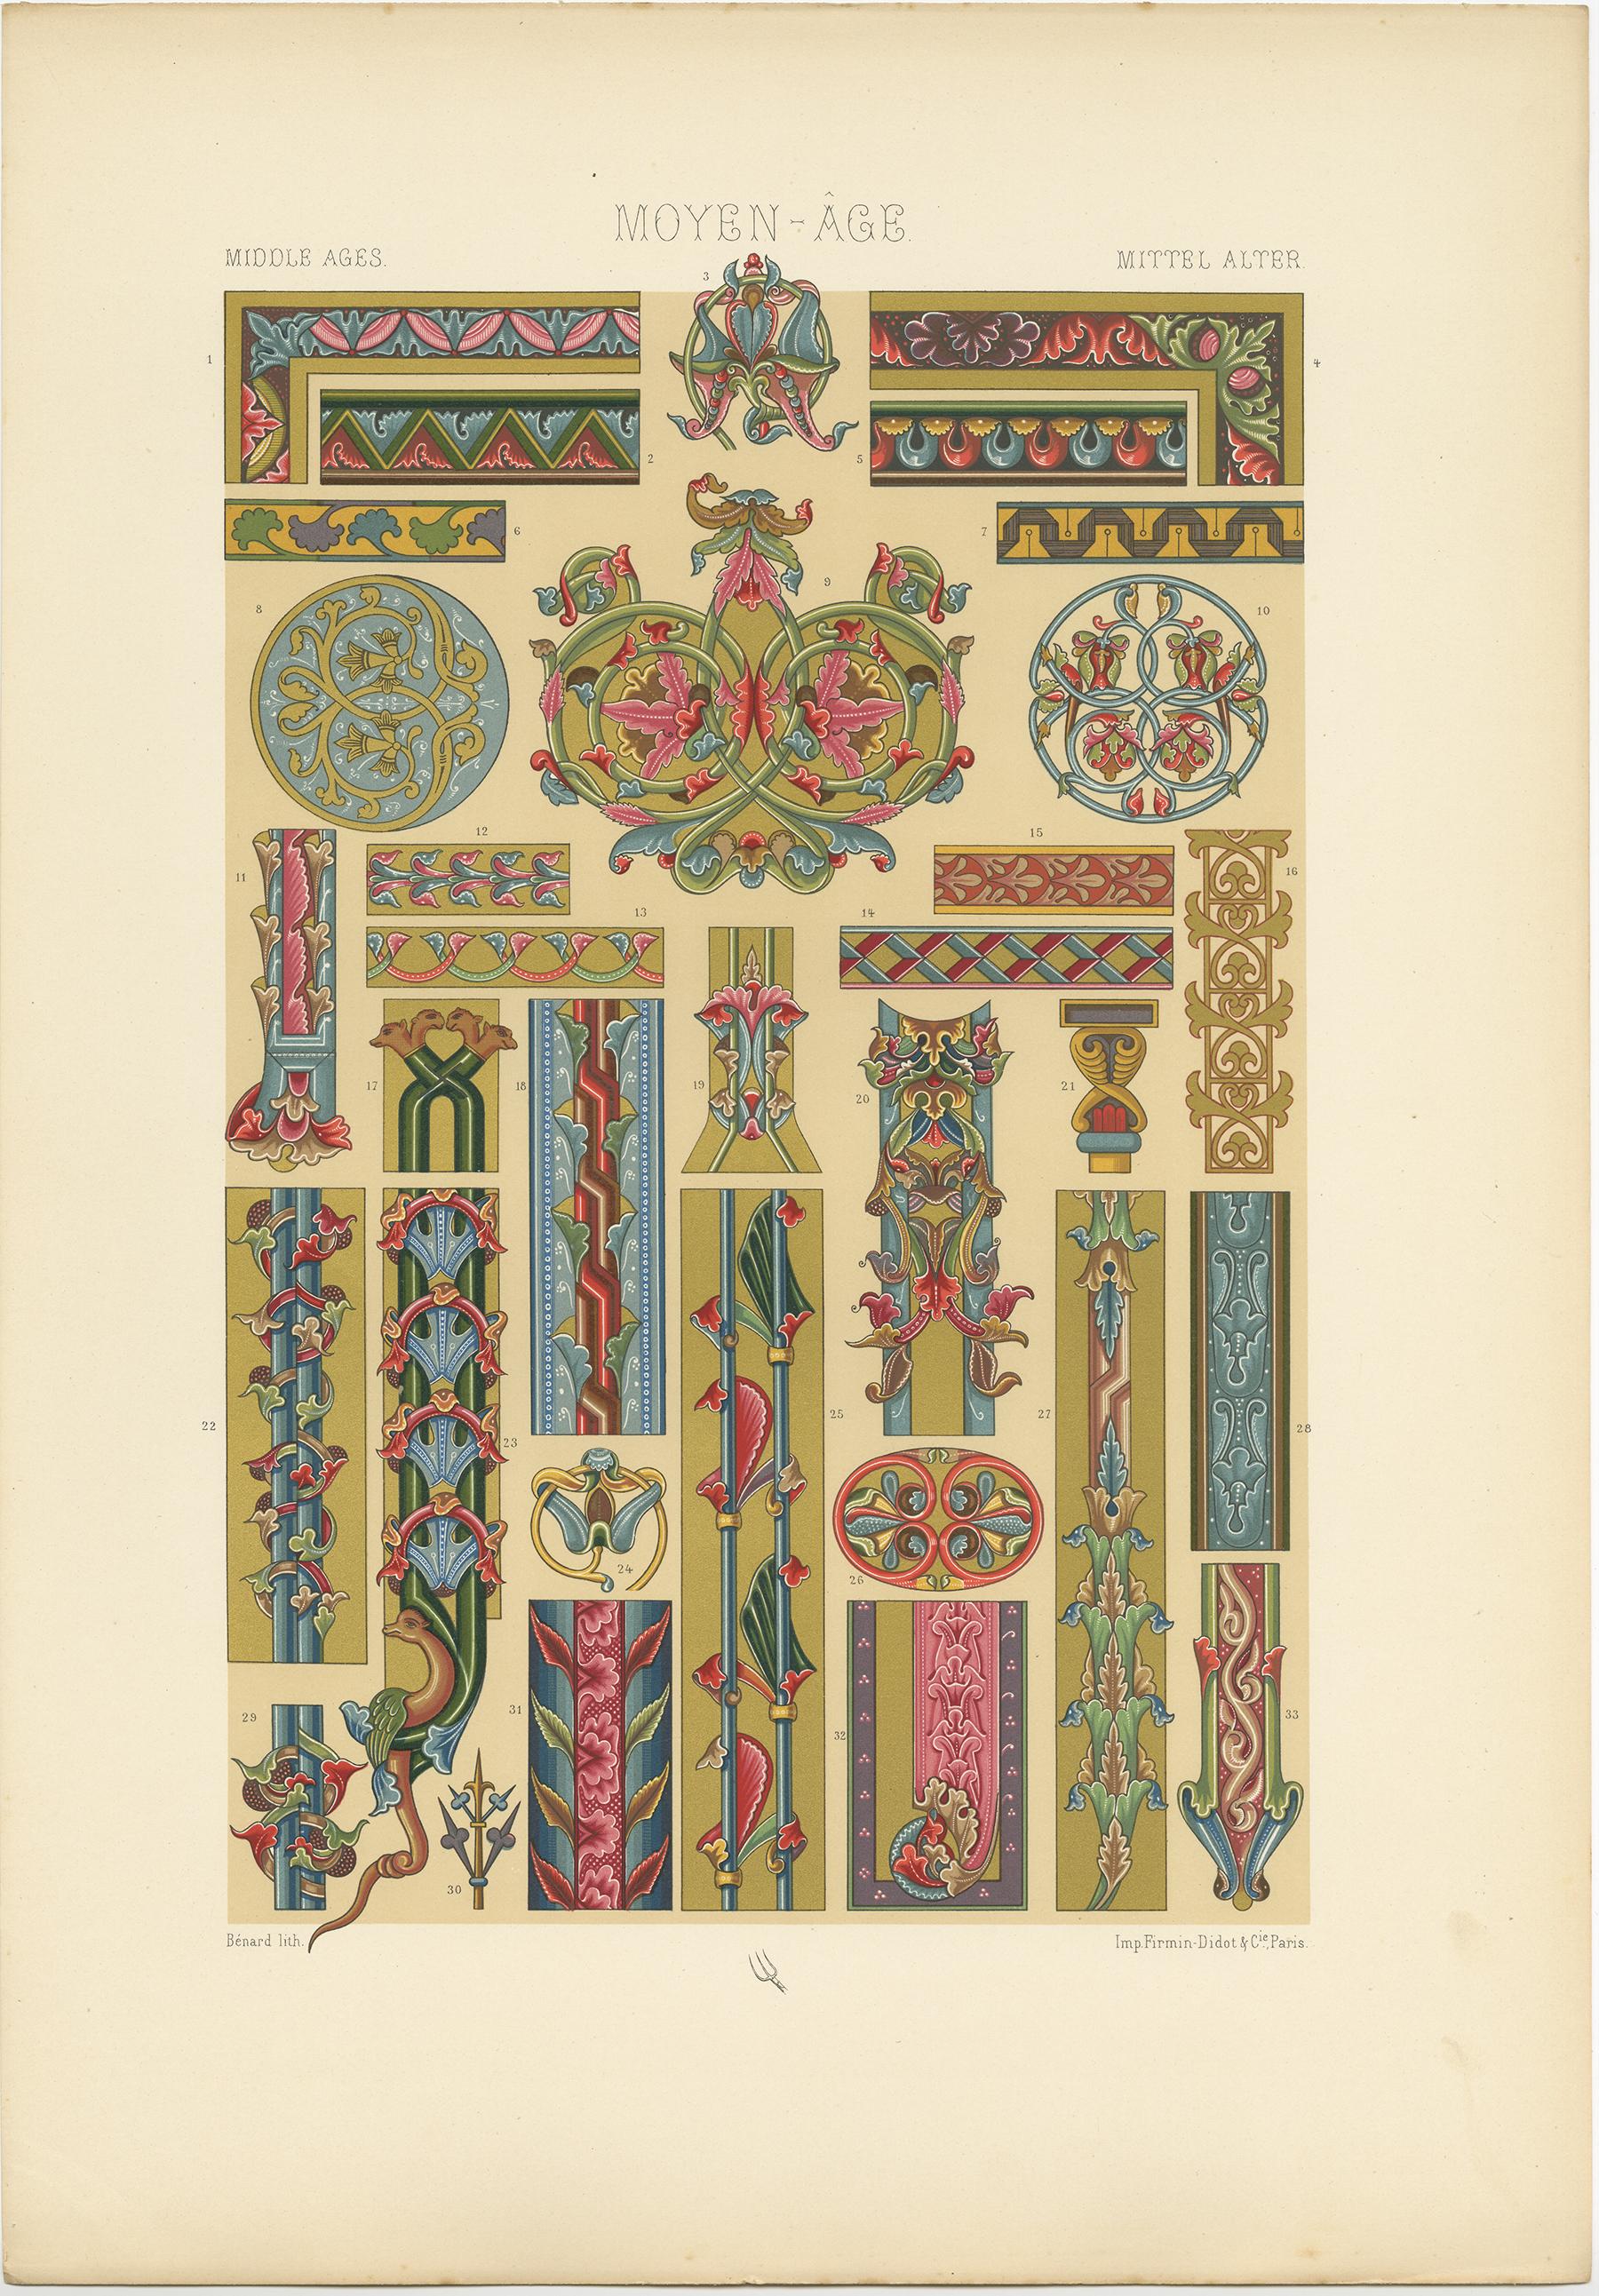 Antique print titled 'Middle Ages - Moyen Age - Mittel Alter'. Chromolithograph of manuscripts decoration, 8th-12th centuries
ornaments. This print originates from 'l'Ornement Polychrome' by Auguste Racinet. Published circa 1890.